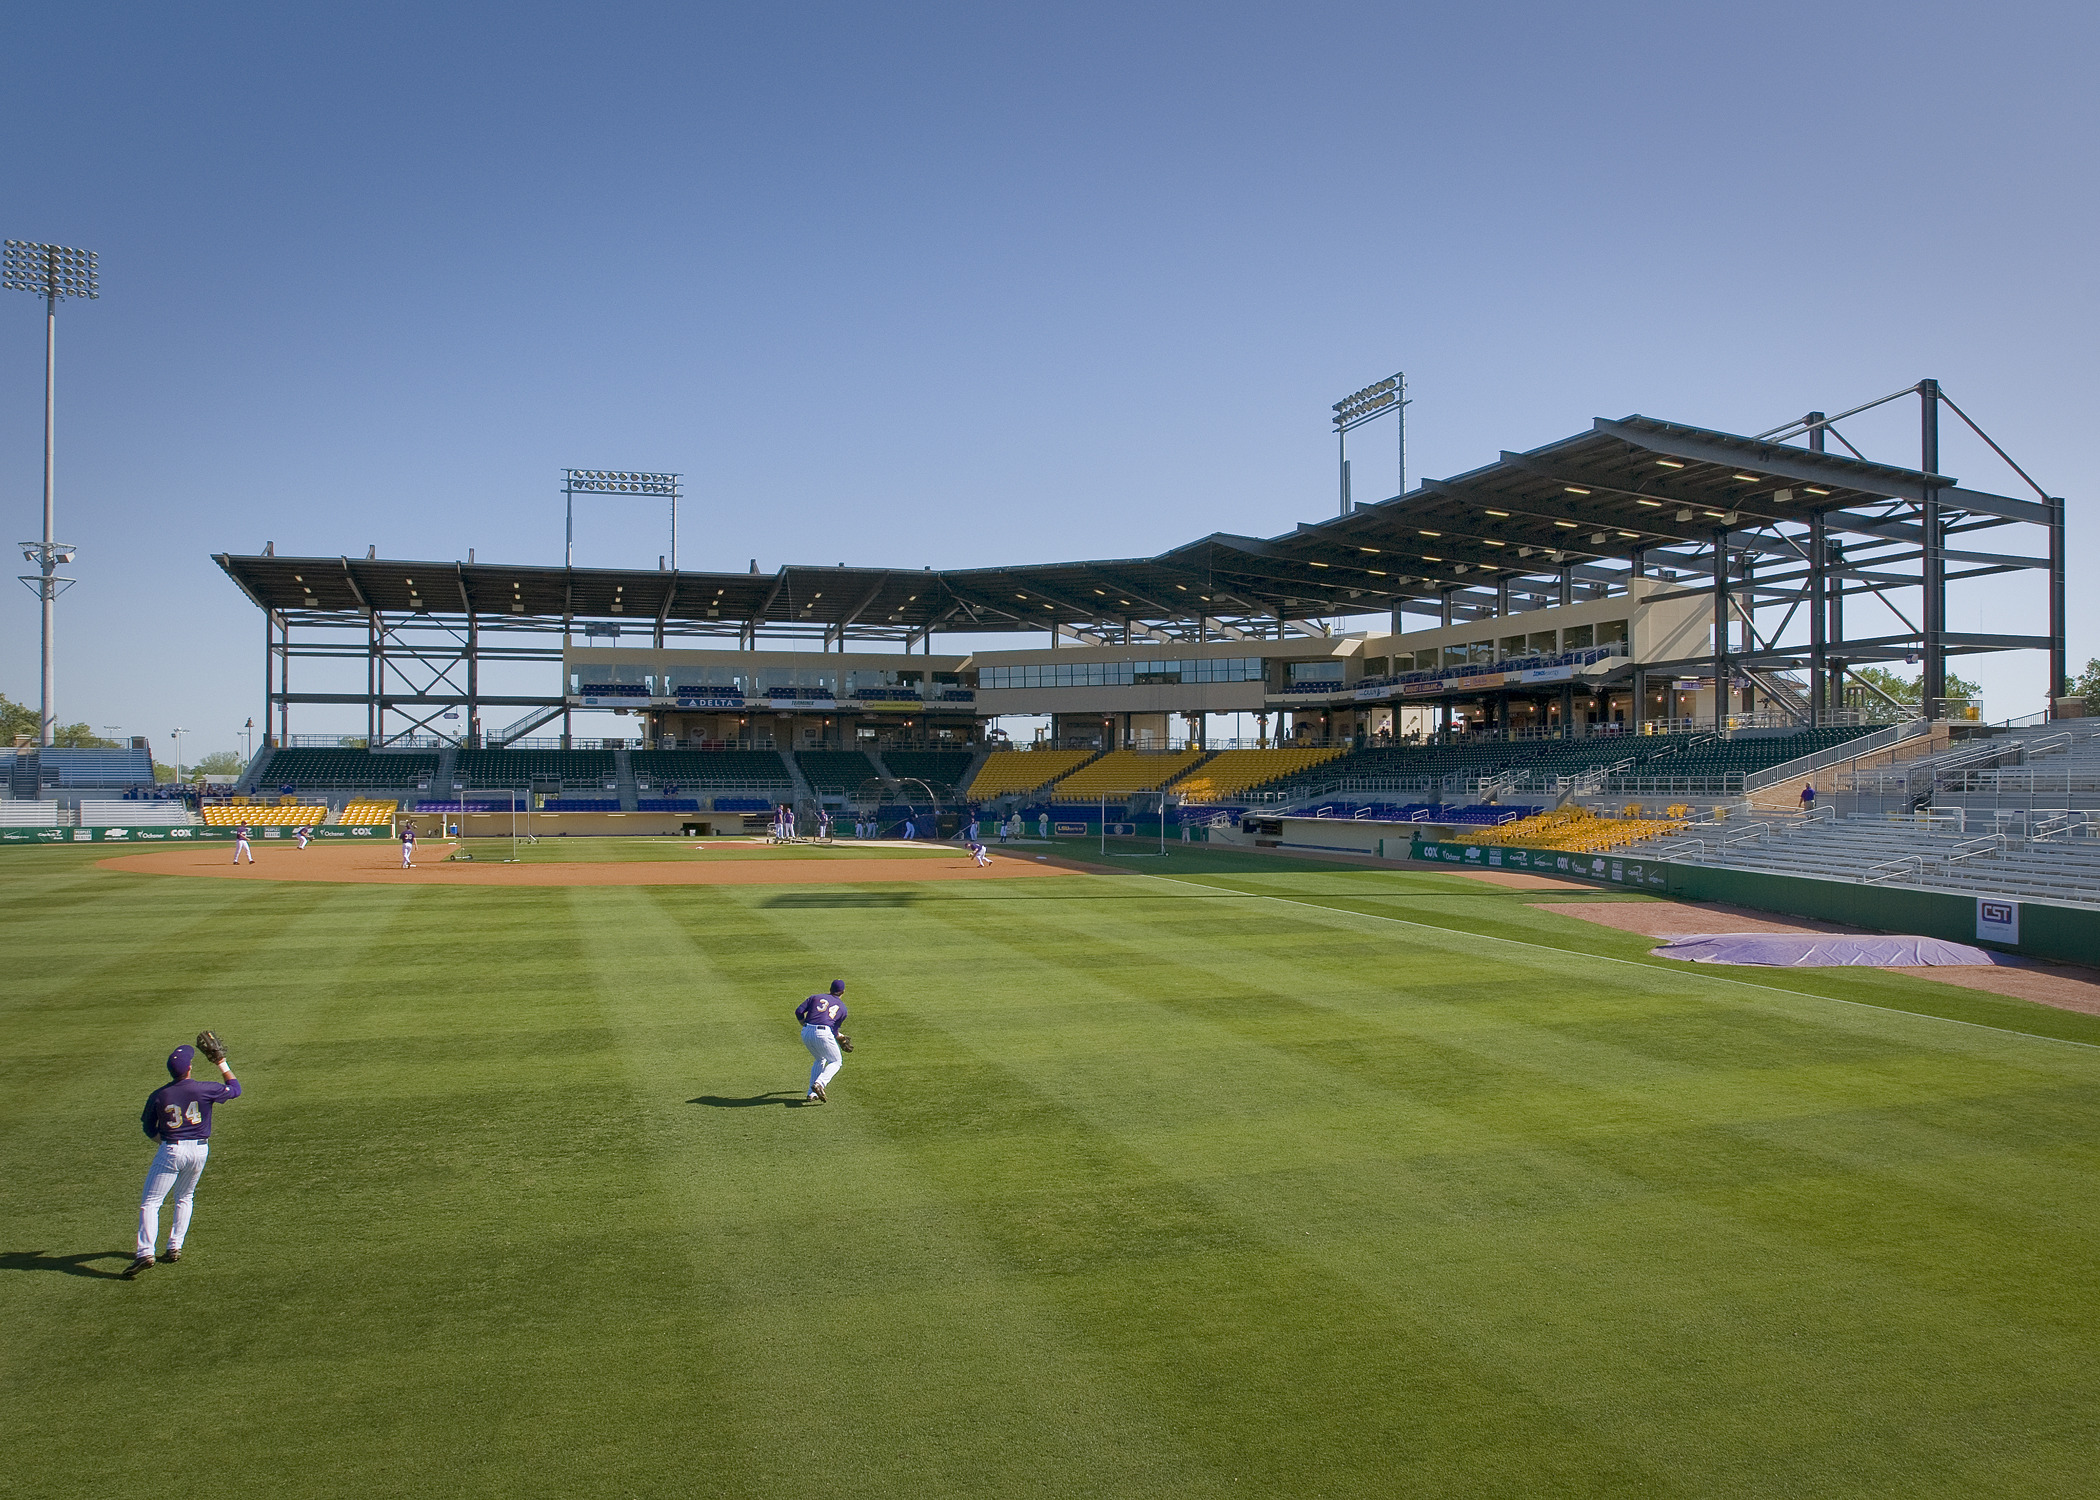 Alex Box Stadium at Louisiana State University viewed from the outfield. Yellow seats around home plate with box suites above